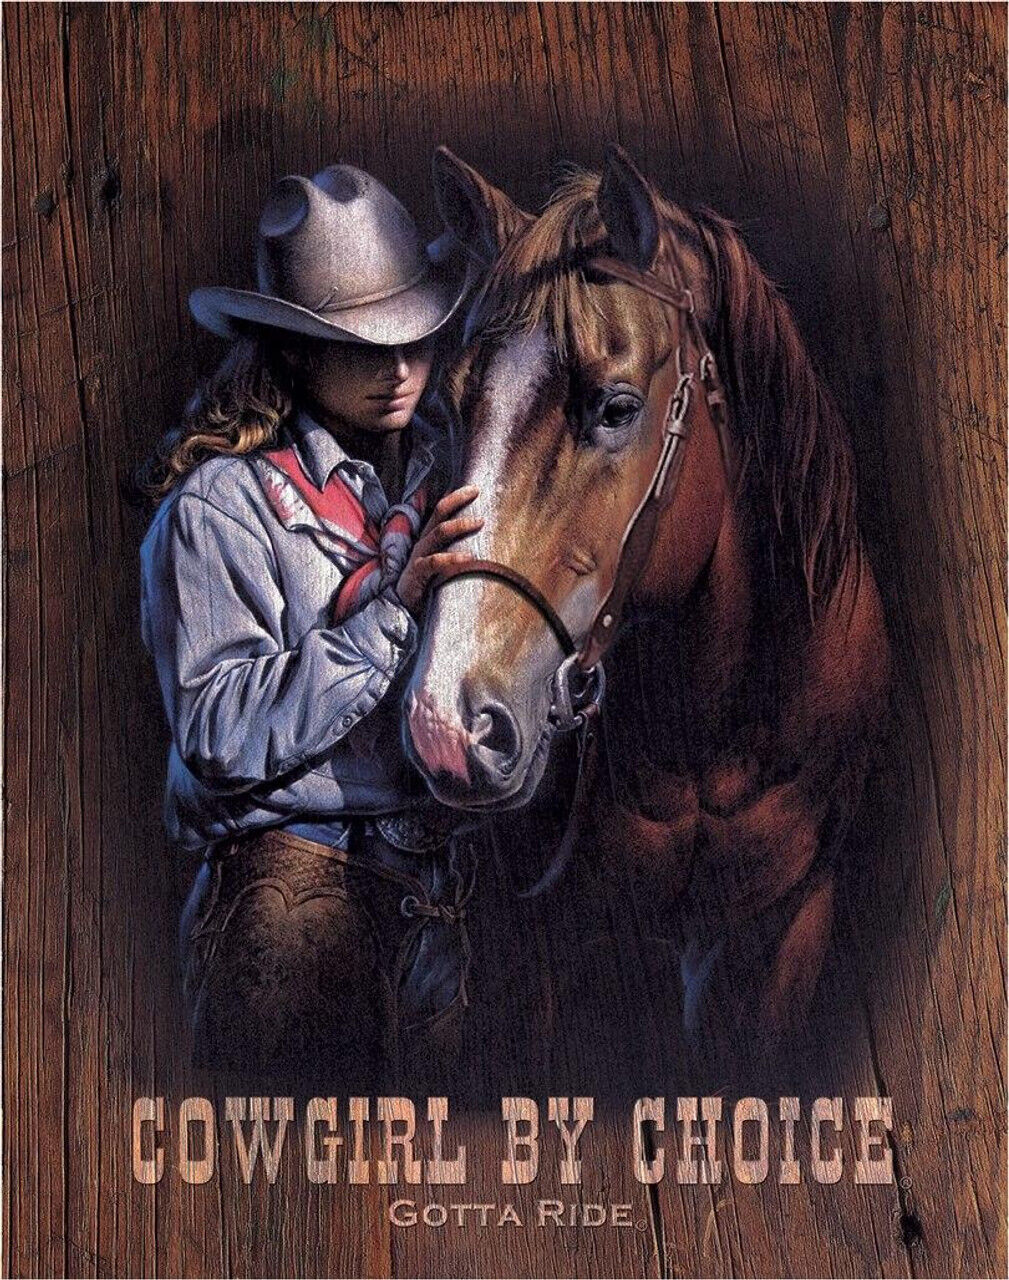 Cowgirl by Choice Gotta Ride Metal Tin Sign 12 x 16 inches